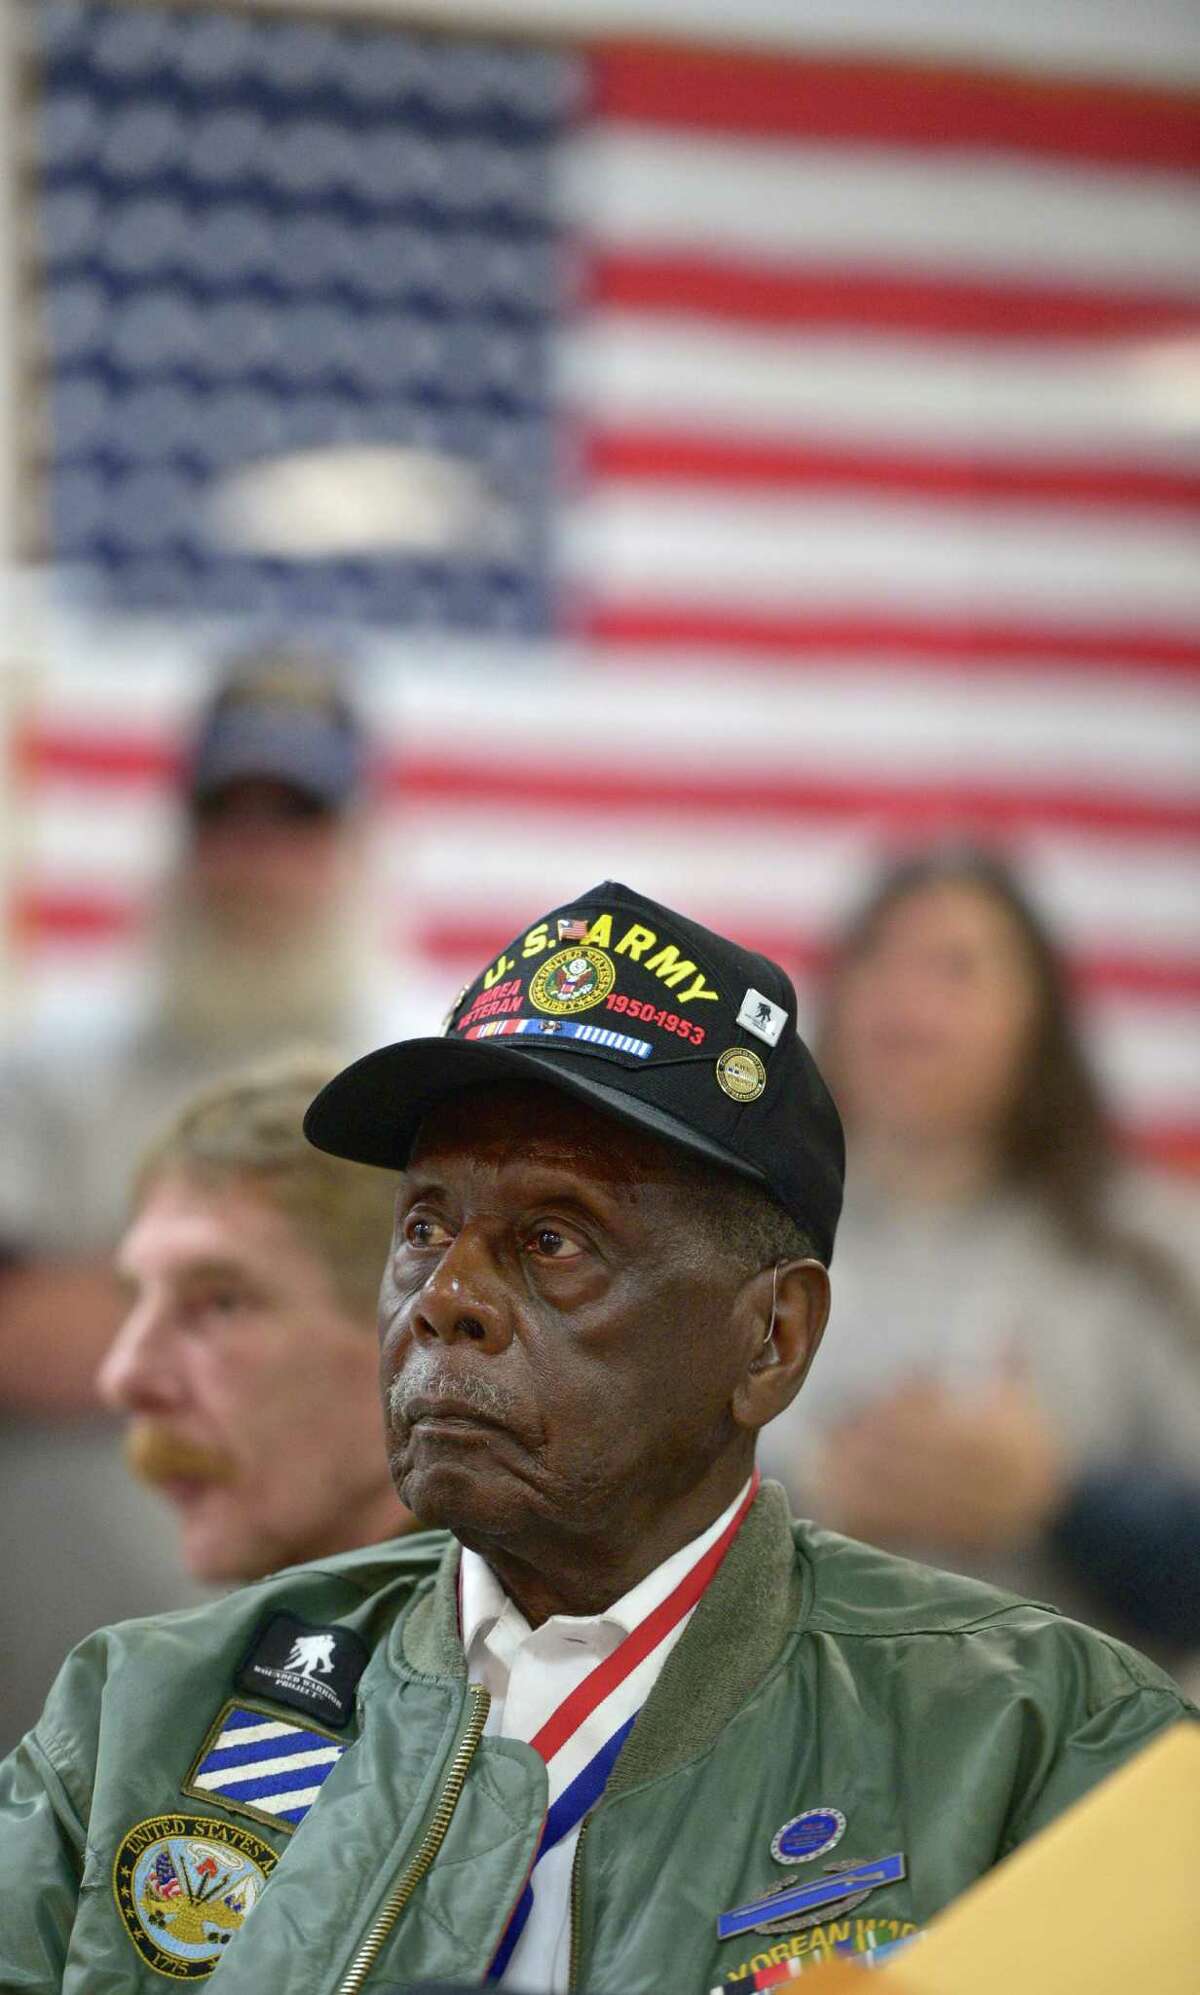 Herman Iczard, of New Milford, listens to a speech during the New Milford Veterans Day Memorial Service held at VFW Post 167211, on Avery Road, in New Milford Wednesday. Iczard served in the Army during the Korean War.